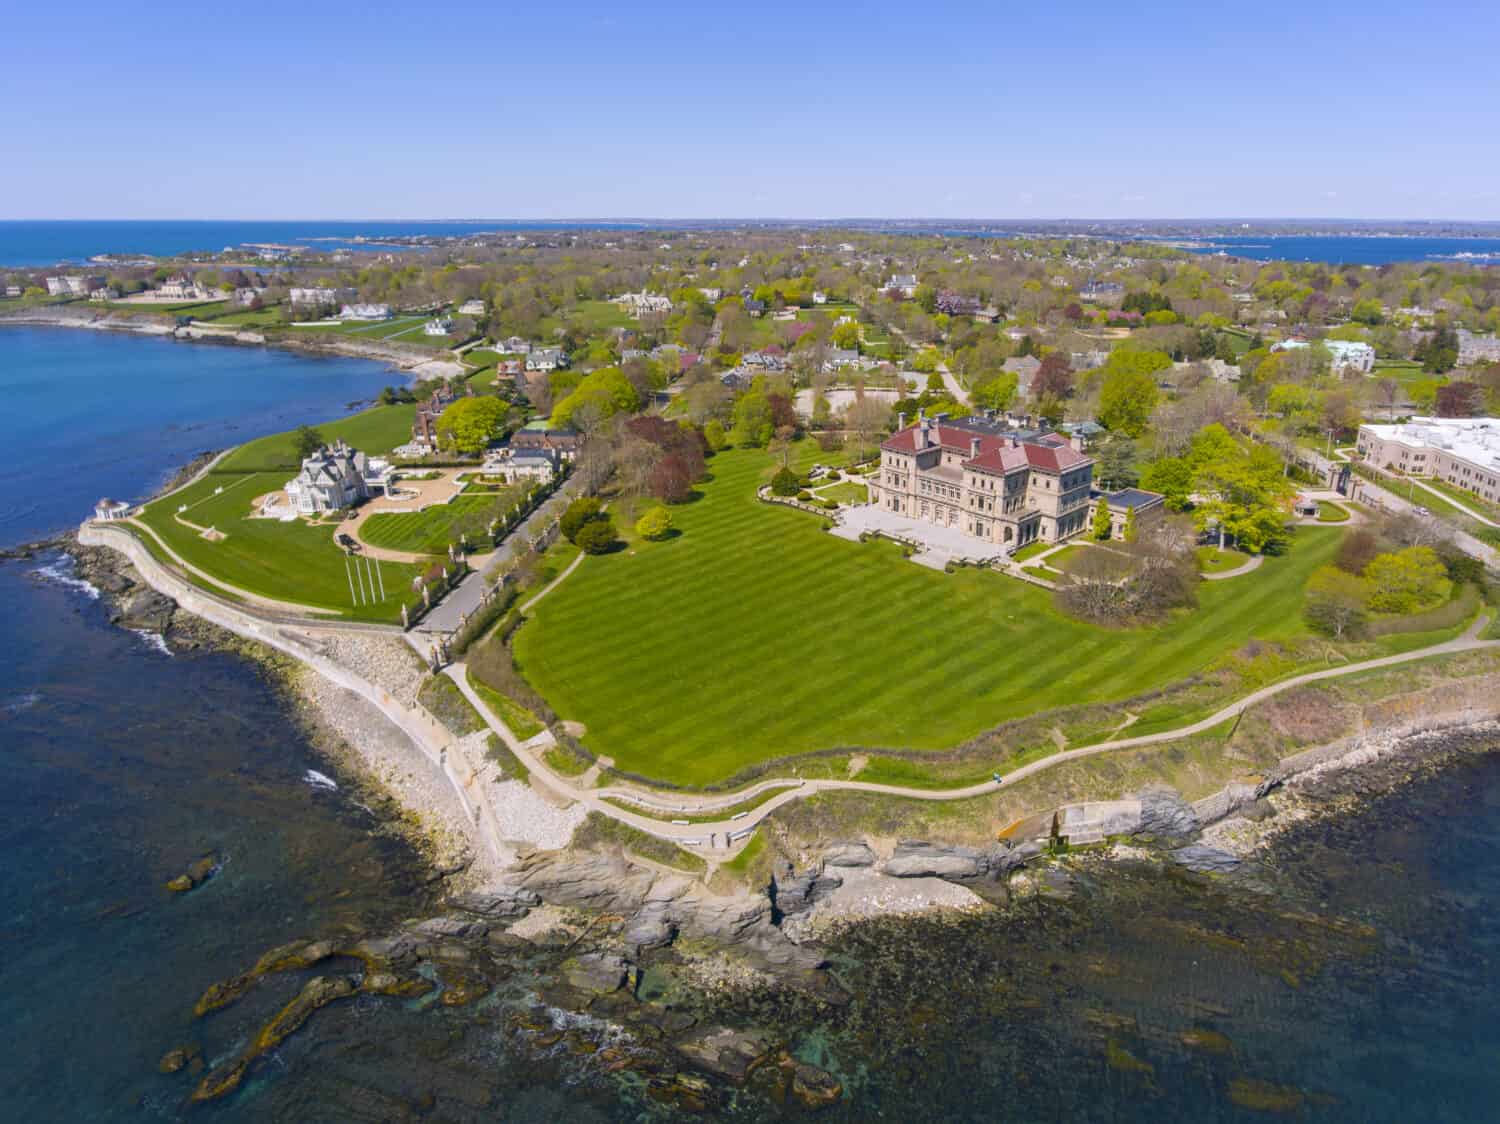 The Breakers and Cliff Walk aerial view at Newport, Rhode Island RI, USA. The Breakers is a Vanderbilt mansion with Italian Renaissance built in 1895 in Bellevue Avenue Historic District in Newport. 